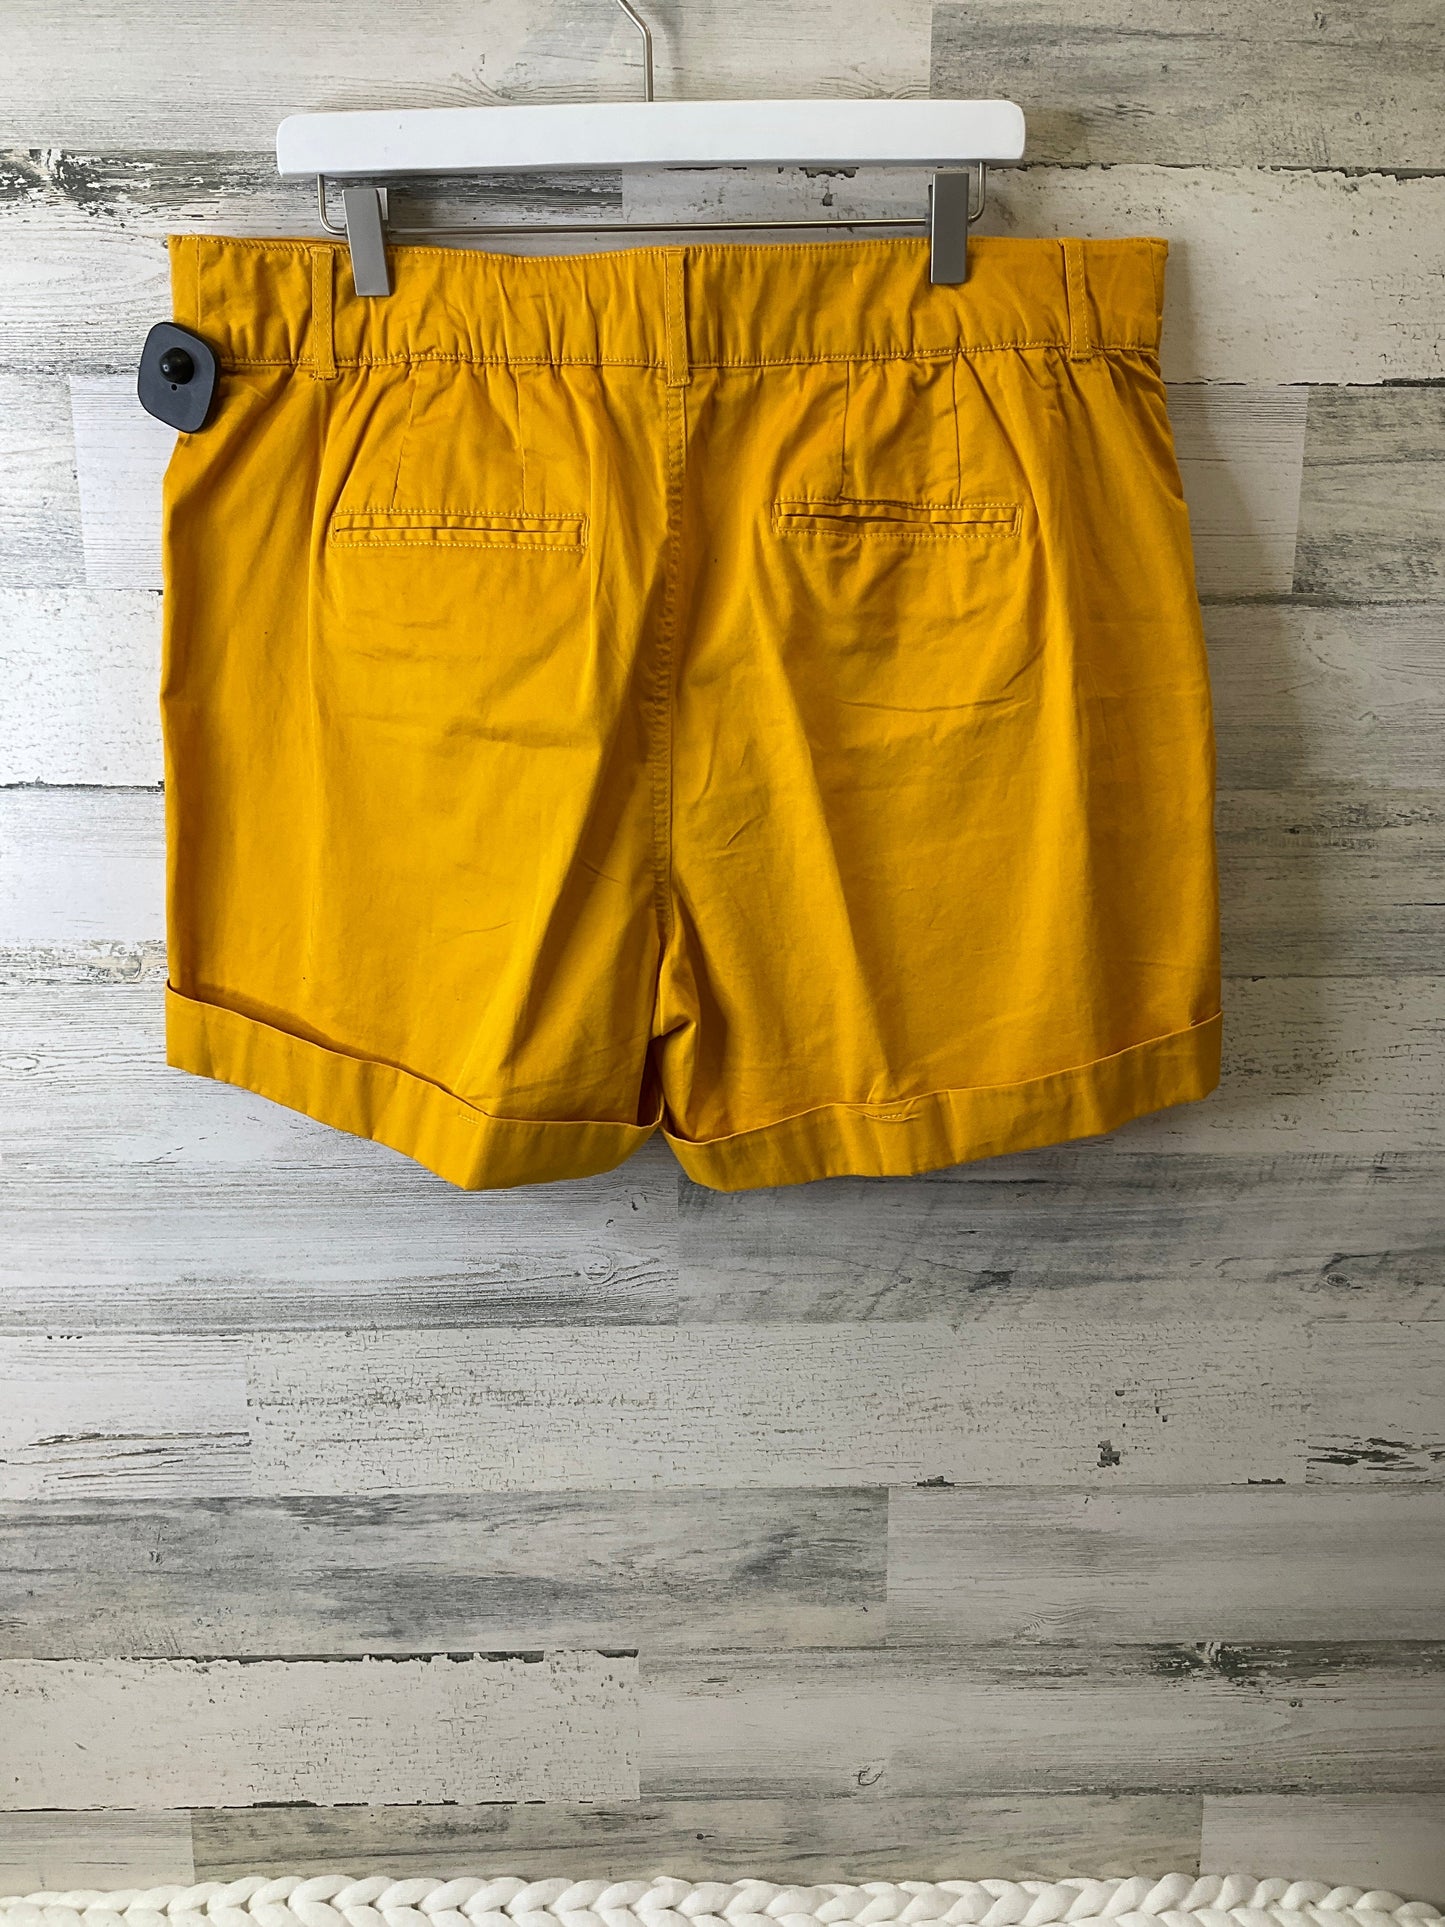 Shorts By Cato  Size: 16